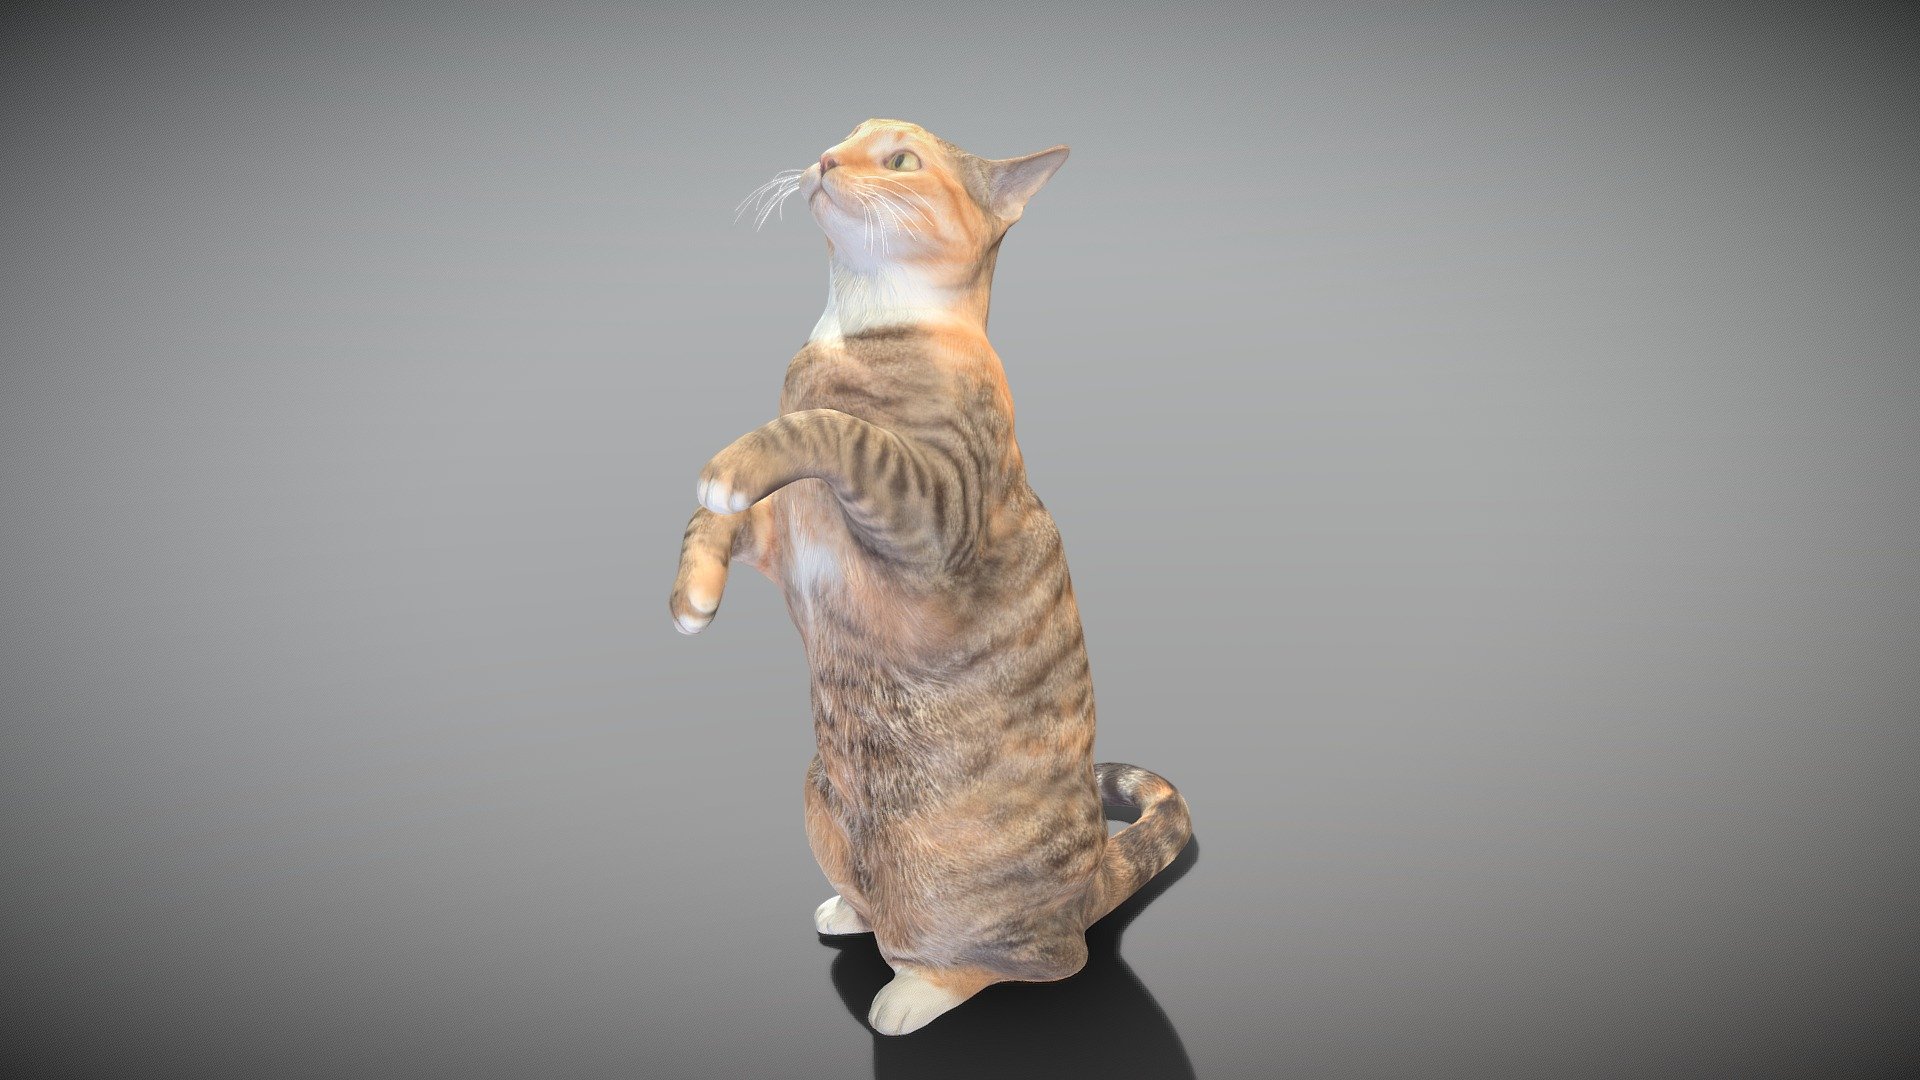 This is a true sized and highly detailed model of a young charming calico cat. It will add life and coziness to any architectural visualisation of houses, playgrounds, parques, urban landscapes, etc. This model is suitable for game engine integration, VR/AR content, etc.

Technical specifications:




digital double 3d scan model

150k &amp; 30k triangles | double triangulated

high-poly model (.ztl tool with 5 subdivisions) clean and retopologized automatically via ZRemesher

sufficiently clean

PBR textures 8K resolution: Diffuse, Normal, Specular maps

non-overlapping UV map

no extra plugins are required for this model

Download package includes a Cinema 4D project file with Redshift shader, OBJ, FBX, STL files, which are applicable for 3ds Max, Maya, Unreal Engine, Unity, Blender, etc. All the textures you will find in the “Tex” folder, included into the main archive.

3D EVERYTHING

Stand with Ukraine! - Playful cat 41 - Buy Royalty Free 3D model by deep3dstudio 3d model